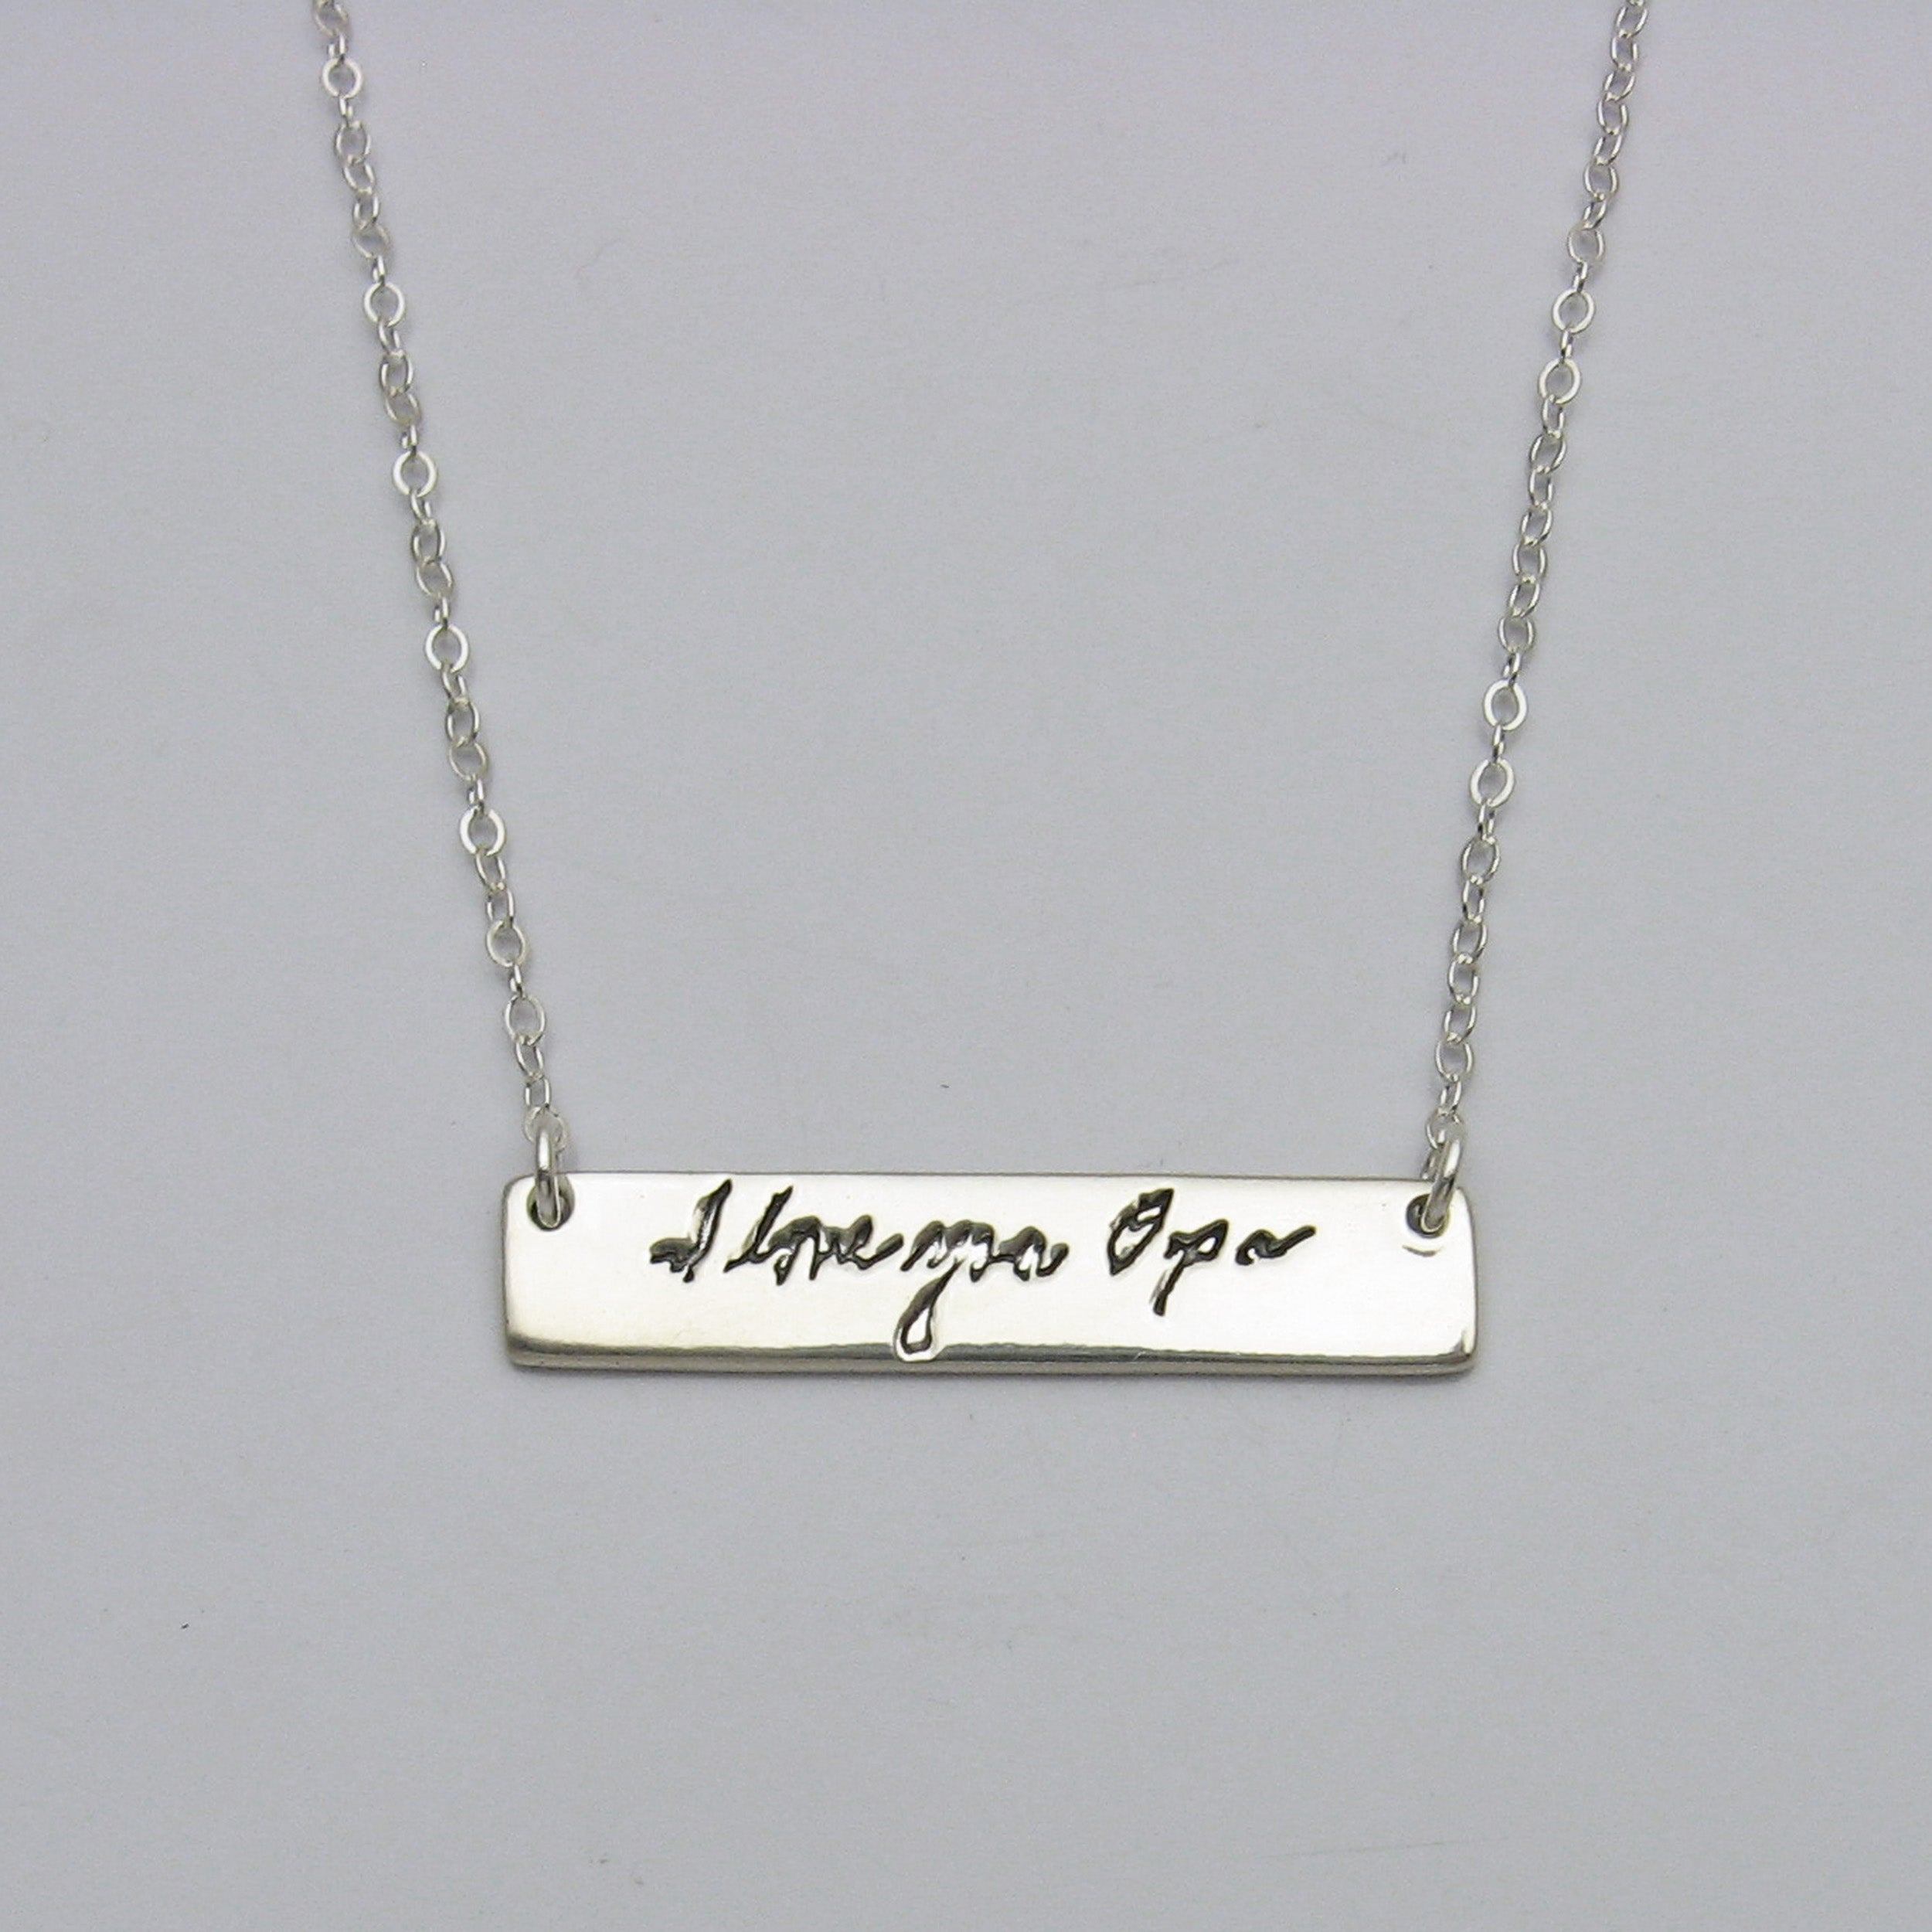 Military tag necklace, Handwriting engraved on gold tag pendant – My-Whys